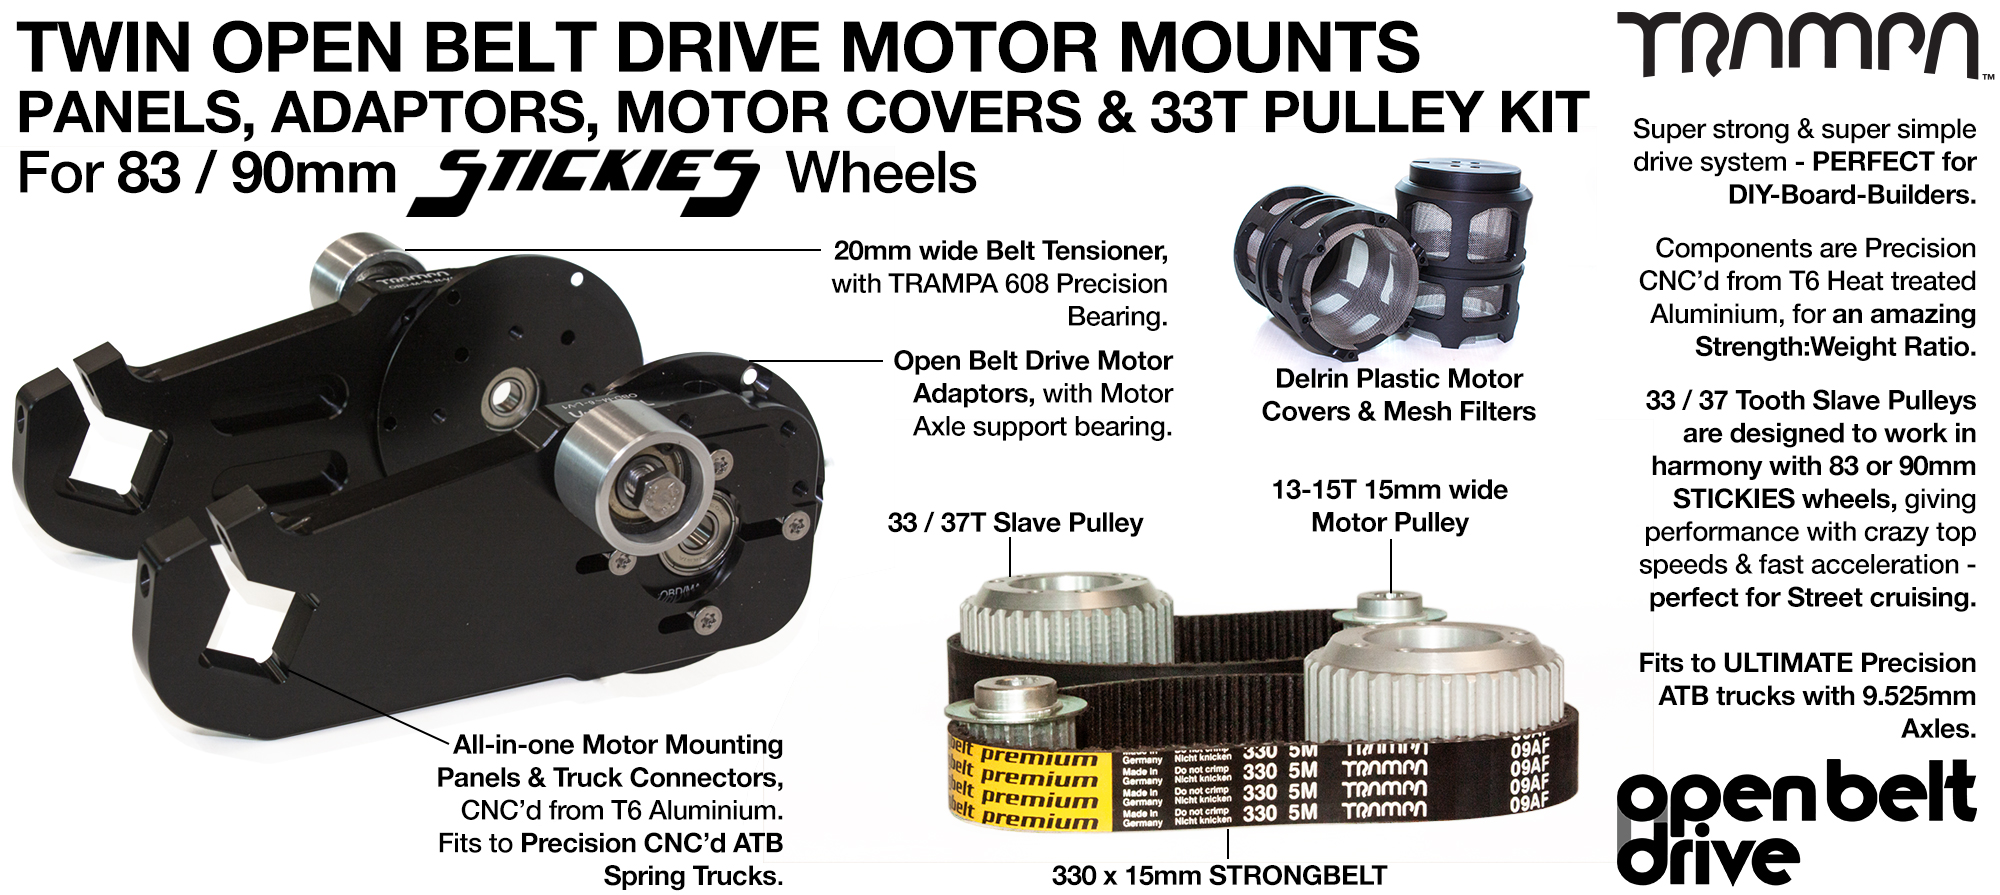 66T OBD Motor Mount with 33 / 37T Pulley kit & Motor Filters - TWIN